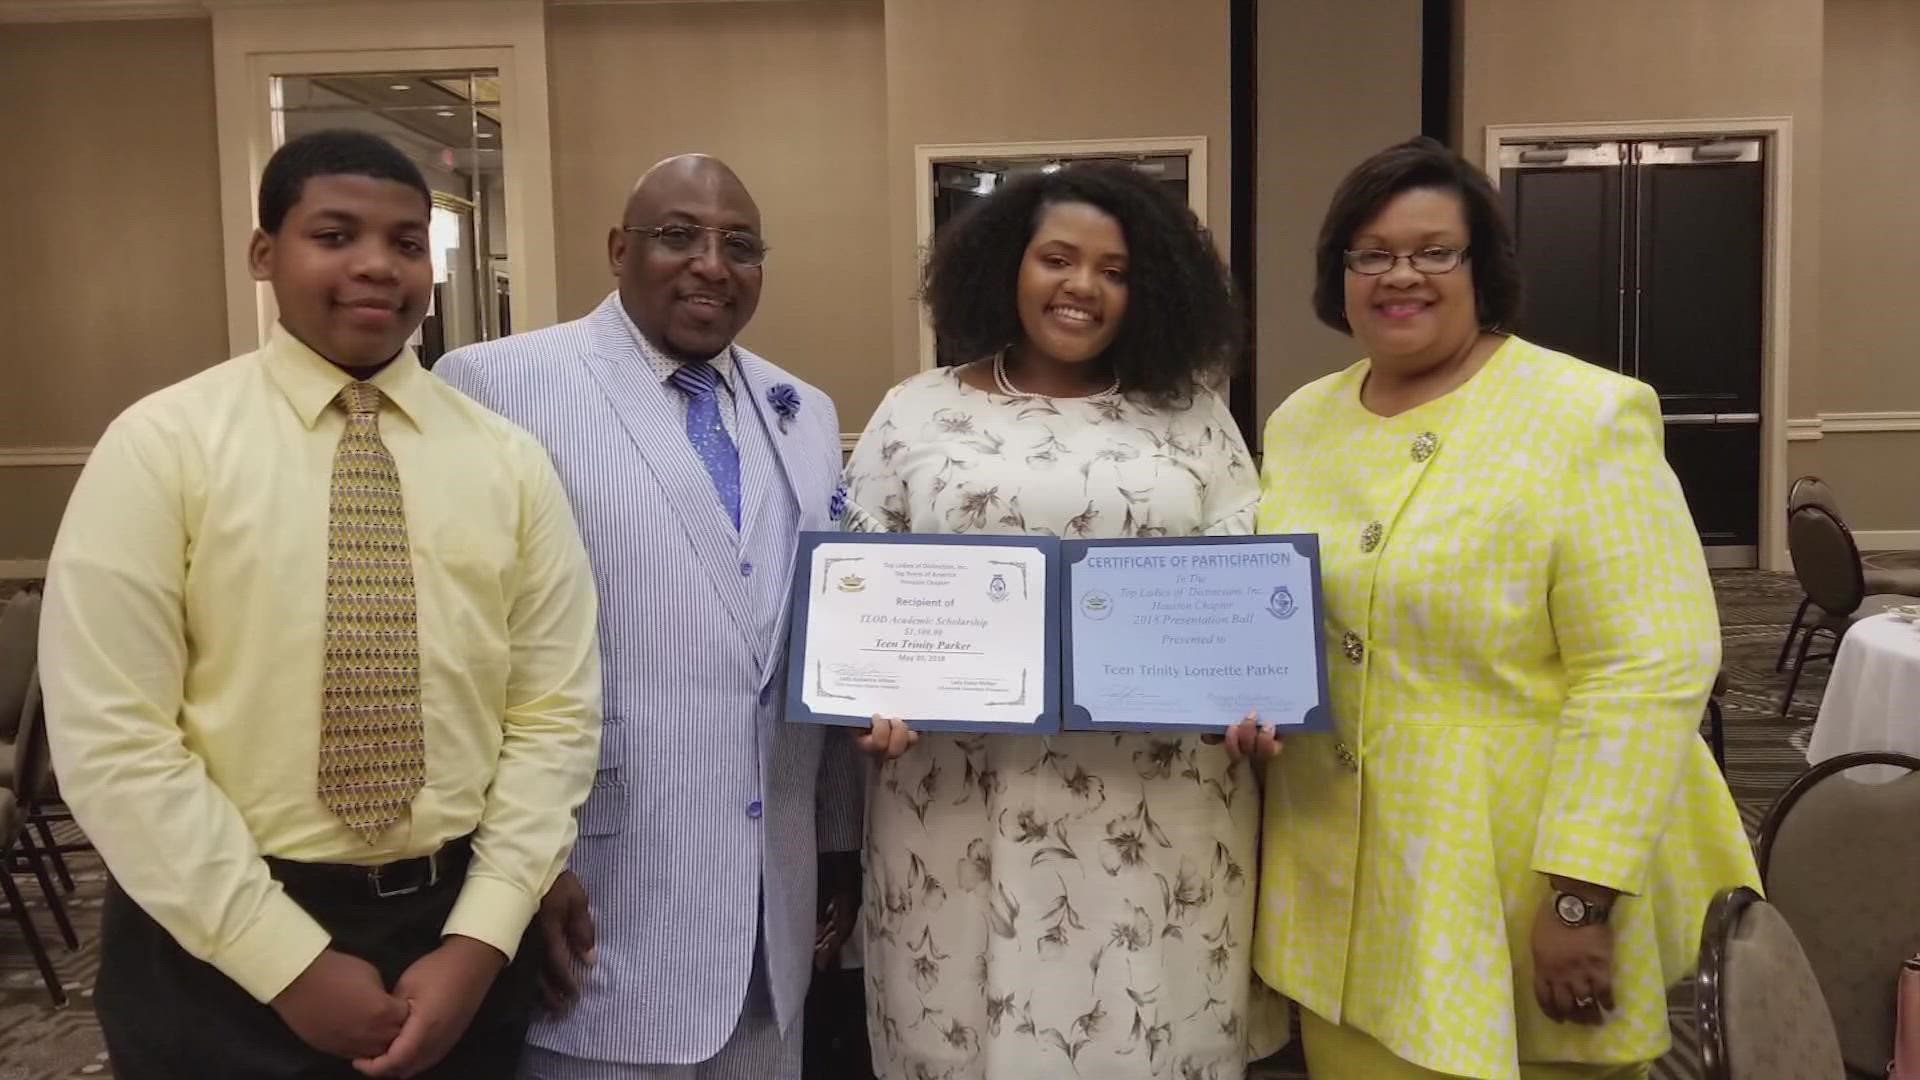 "I’m so grateful to the members of the Greater Houston Frontiers Club that have poured into me and saw something in me that I didn’t see it in myself," she said.